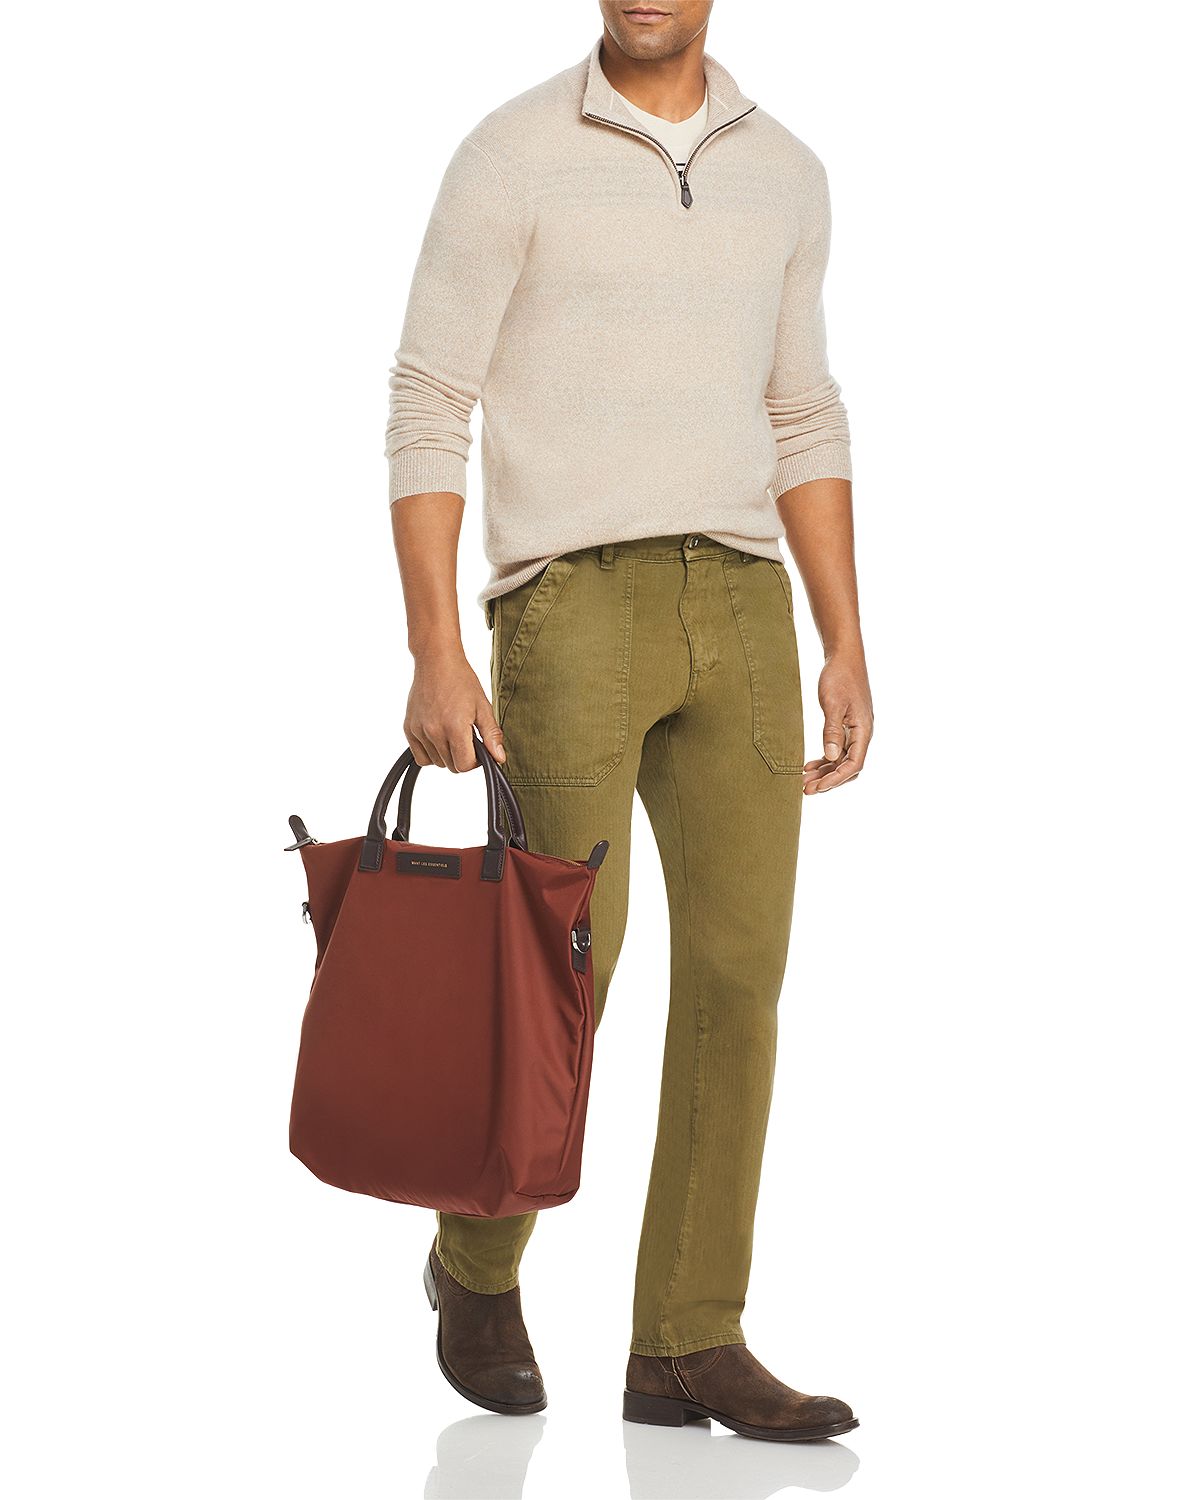 The Men's Store Cashmere Half-zip Sweater Oatmeal